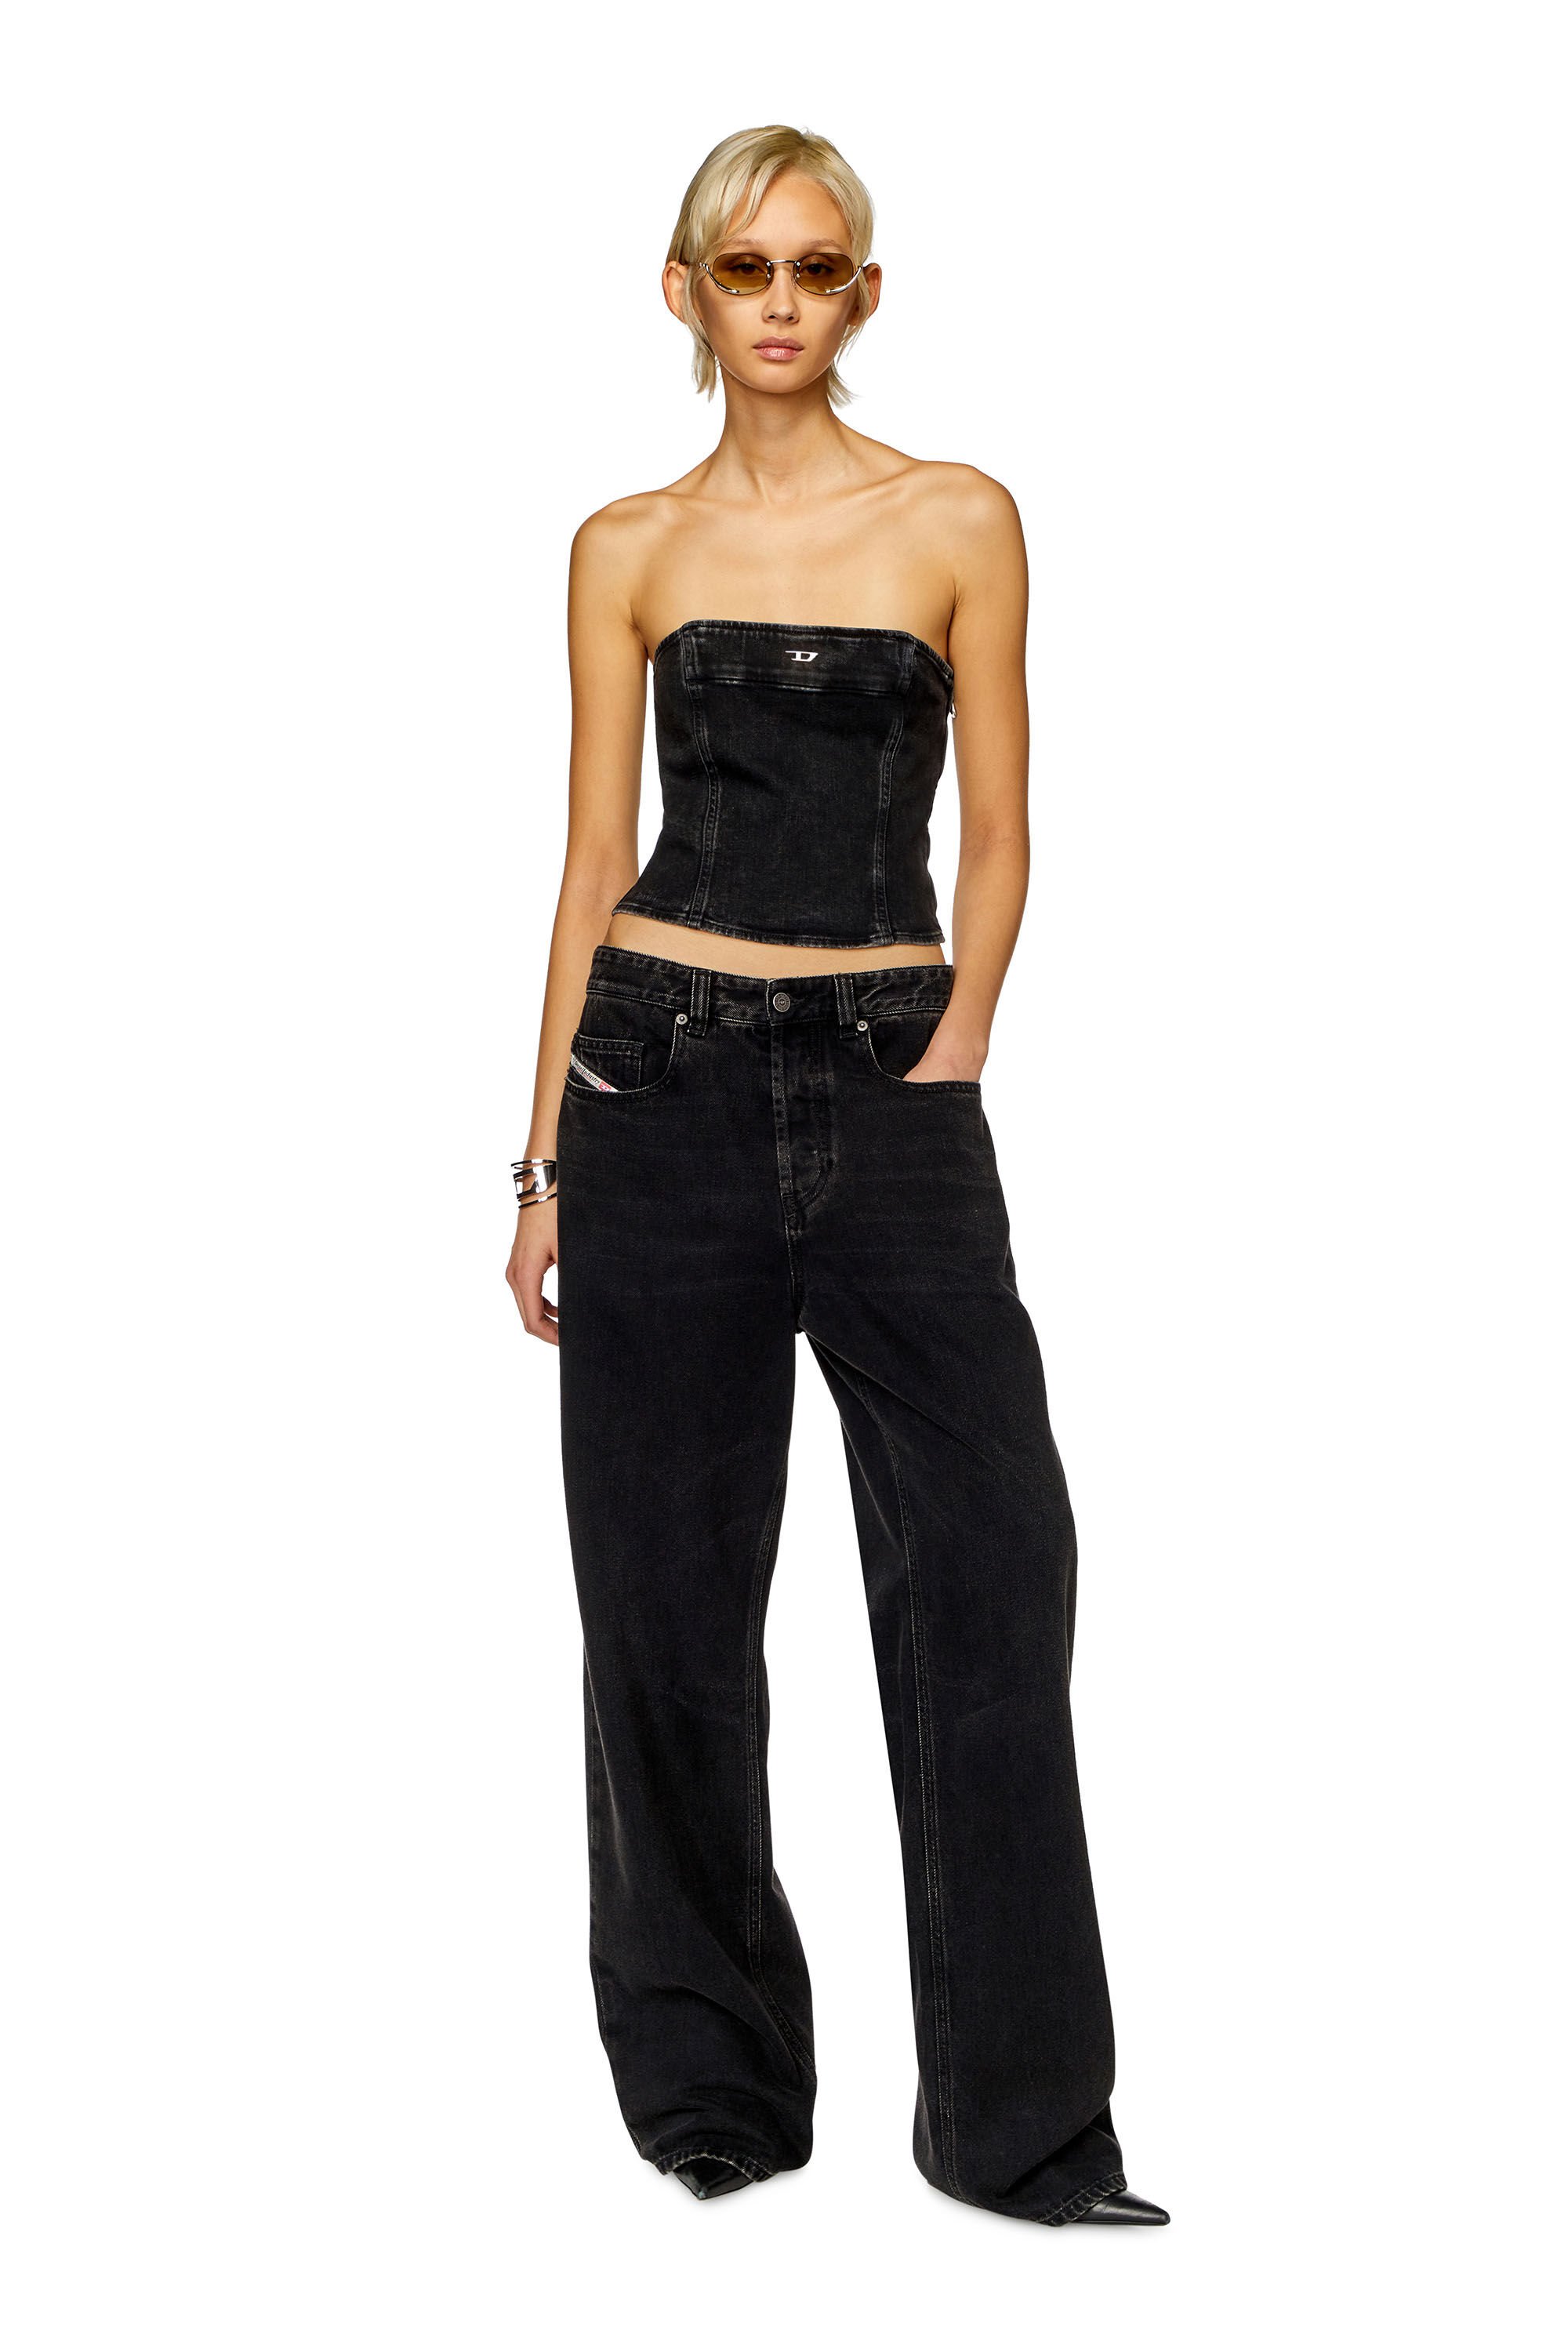 Uni-Exclusive Solid Women Black Track Pants - Buy Uni-Exclusive Solid Women  Black Track Pants Online at Best Prices in India